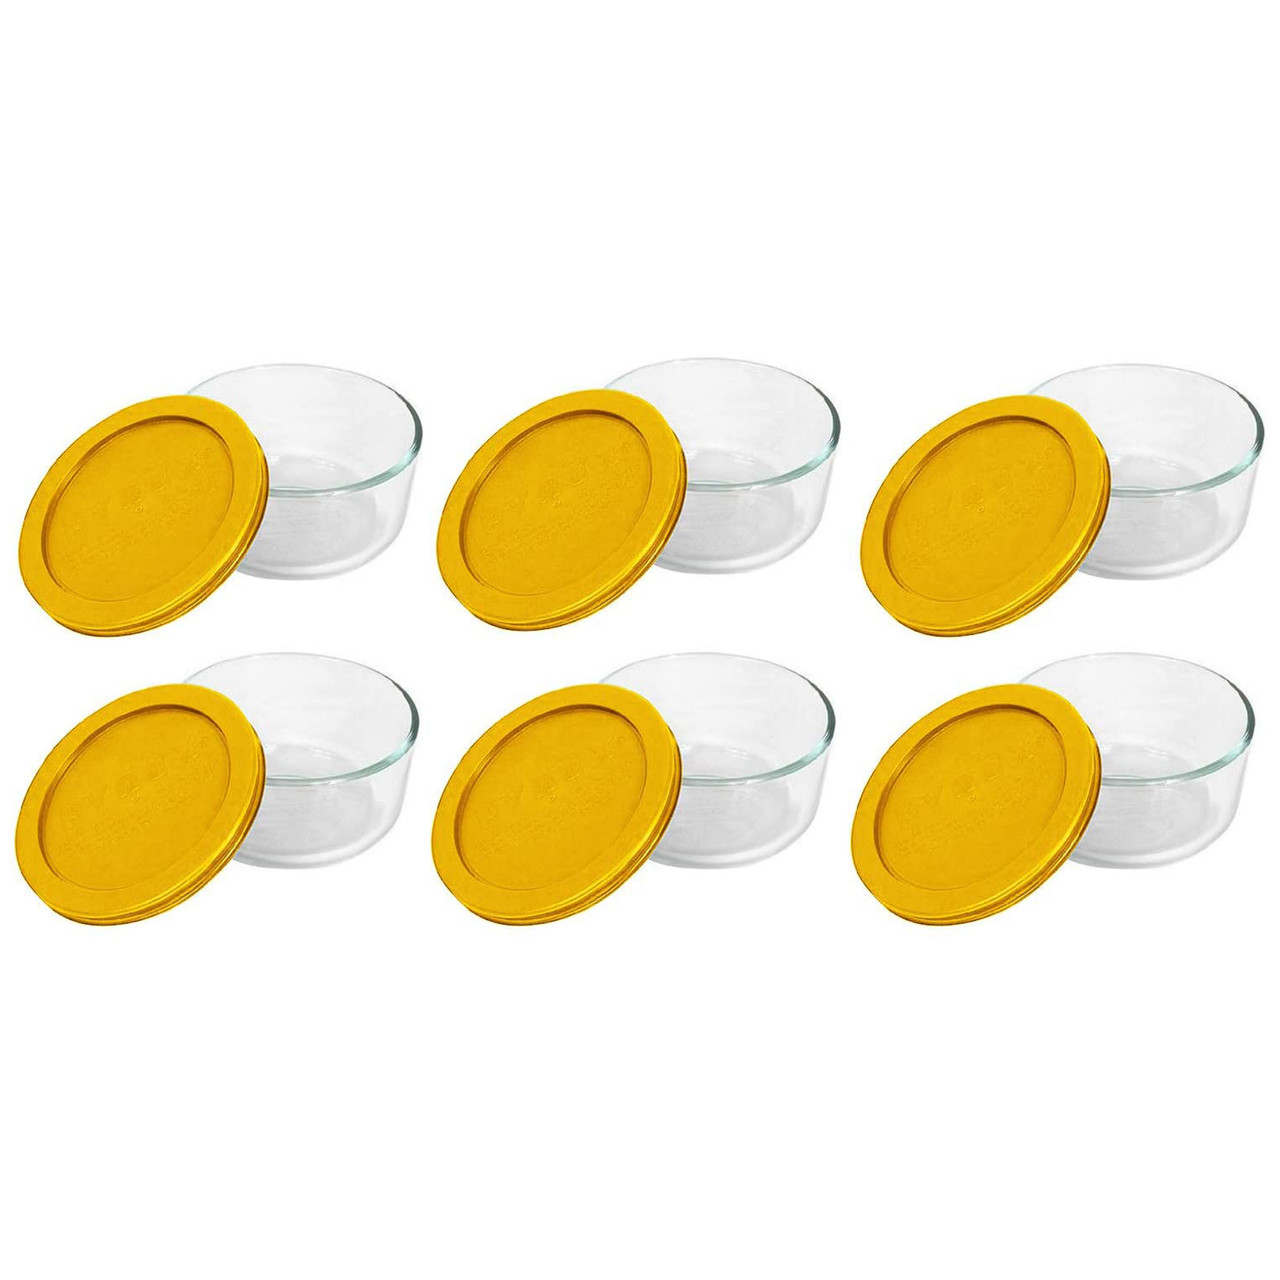 Pyrex 7200 2-Cup Glass Storage Bowls w/ 7200-PC 2-Cup Butter Yellow Lid Covers